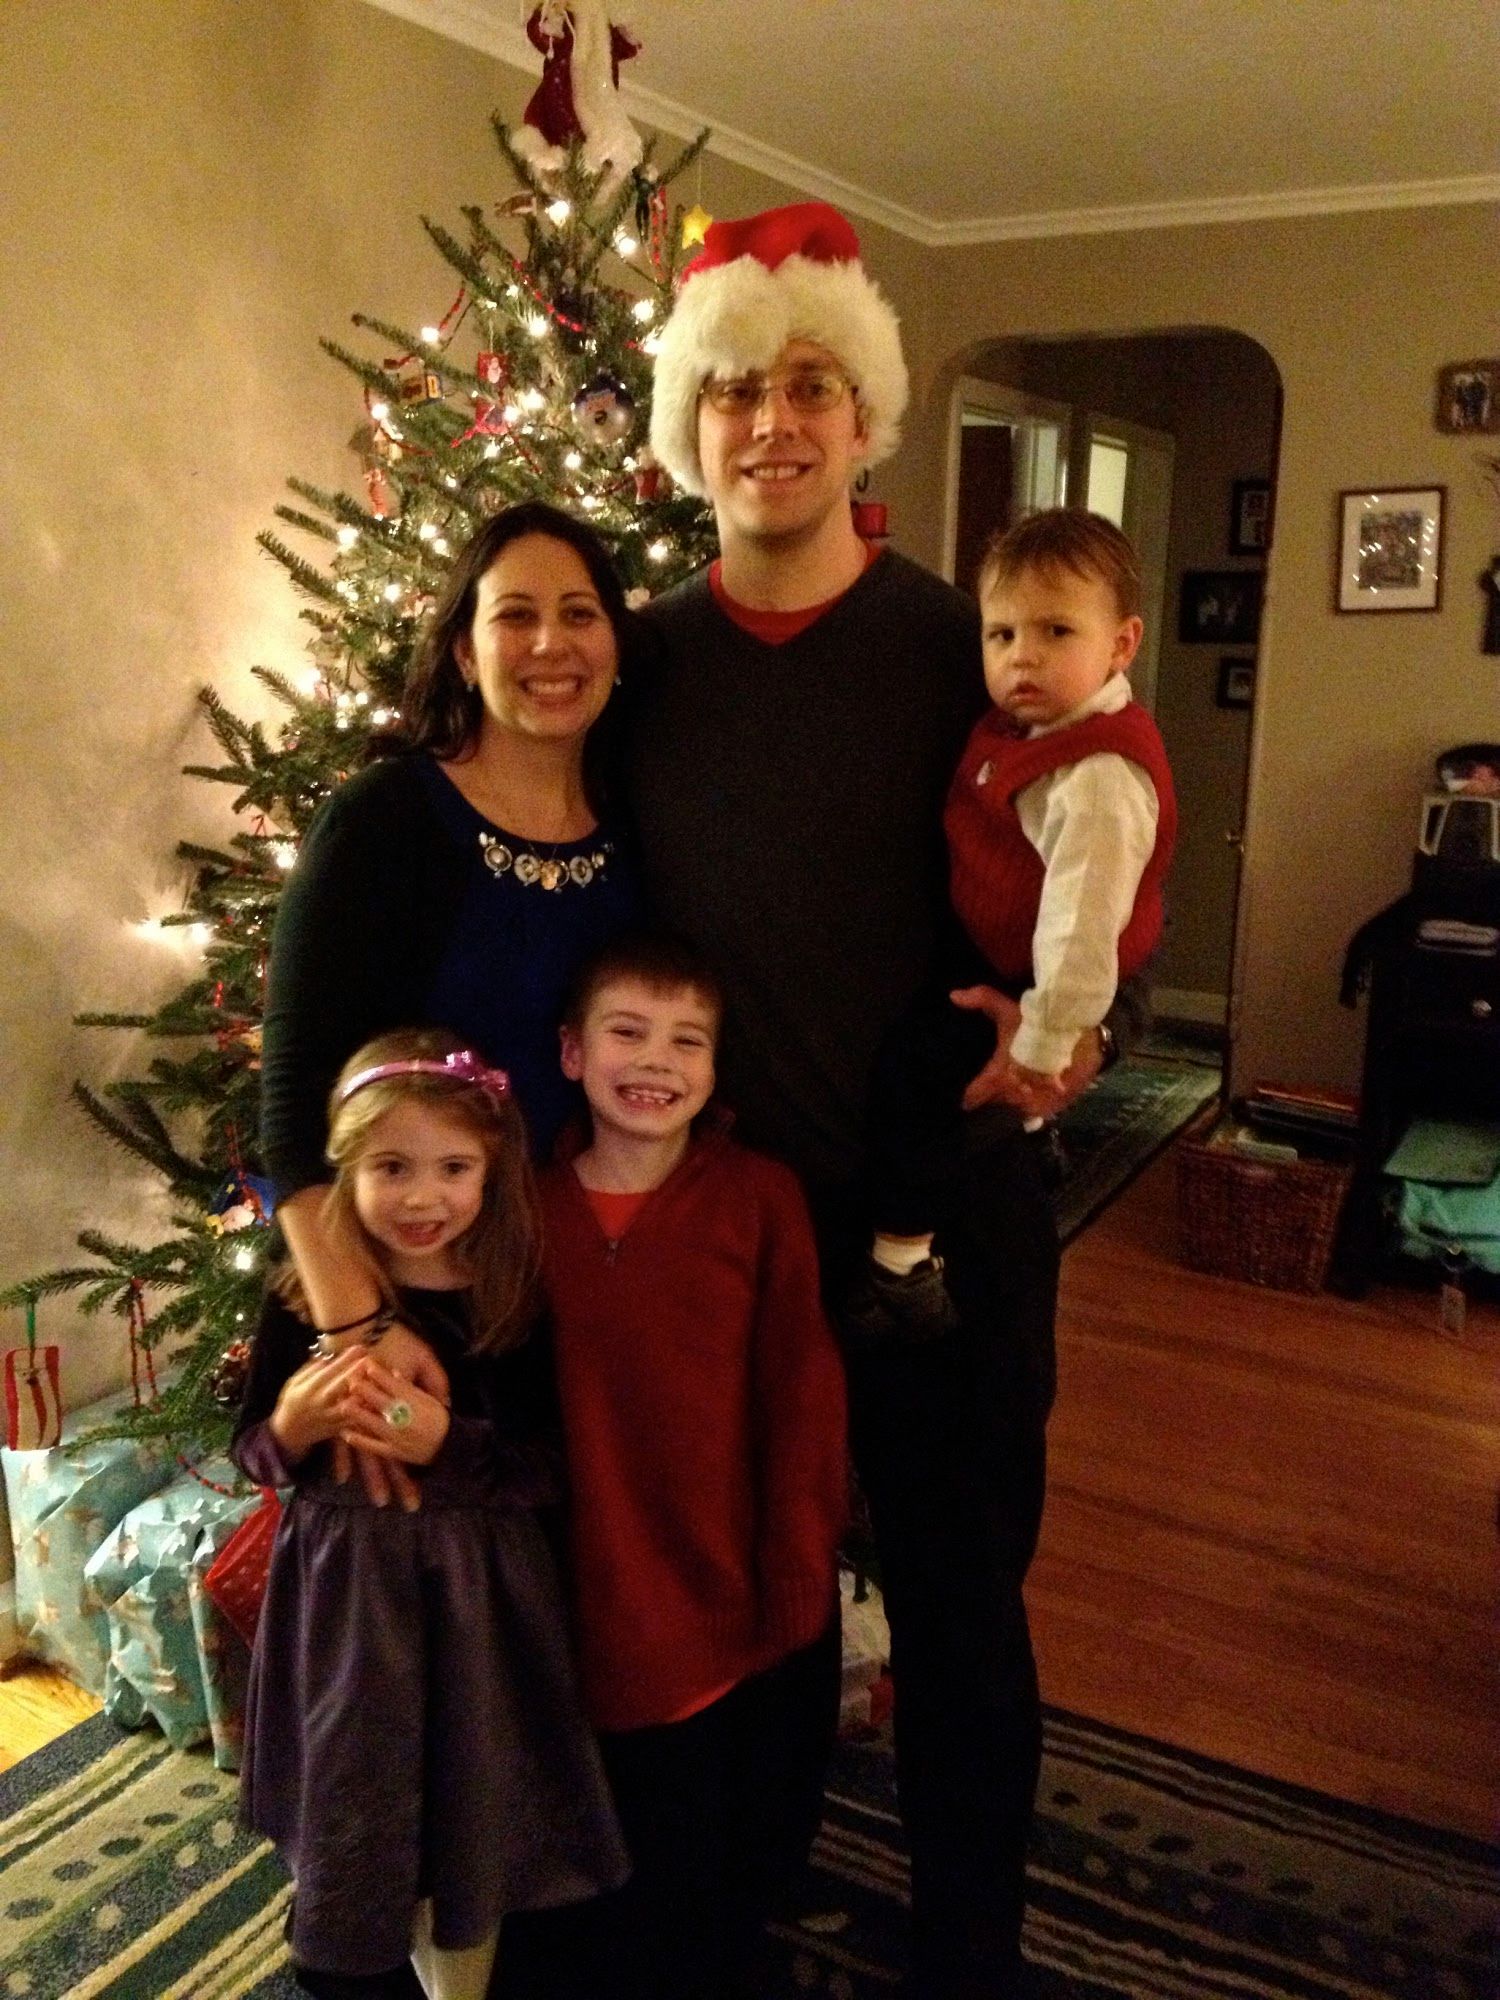  Annual Christmas picture at my SIL's House 